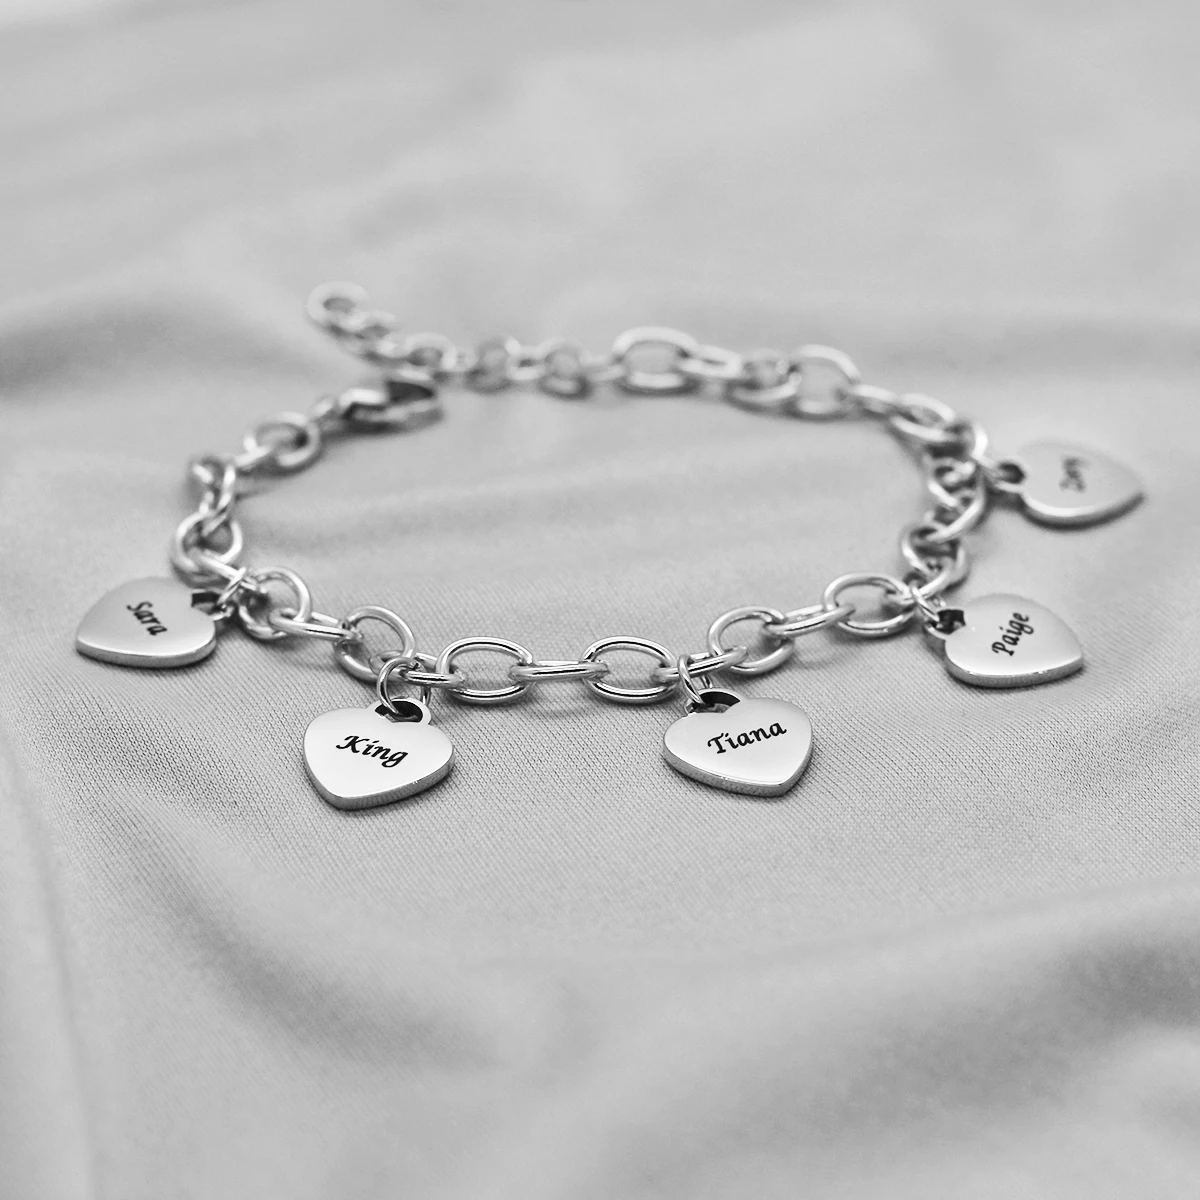 Personalized Engraved Name Custom Bracelet Stainless Steel Chain 1-5 Names  Heart Gold Charm Bracelets for Women Jewelry Gifts